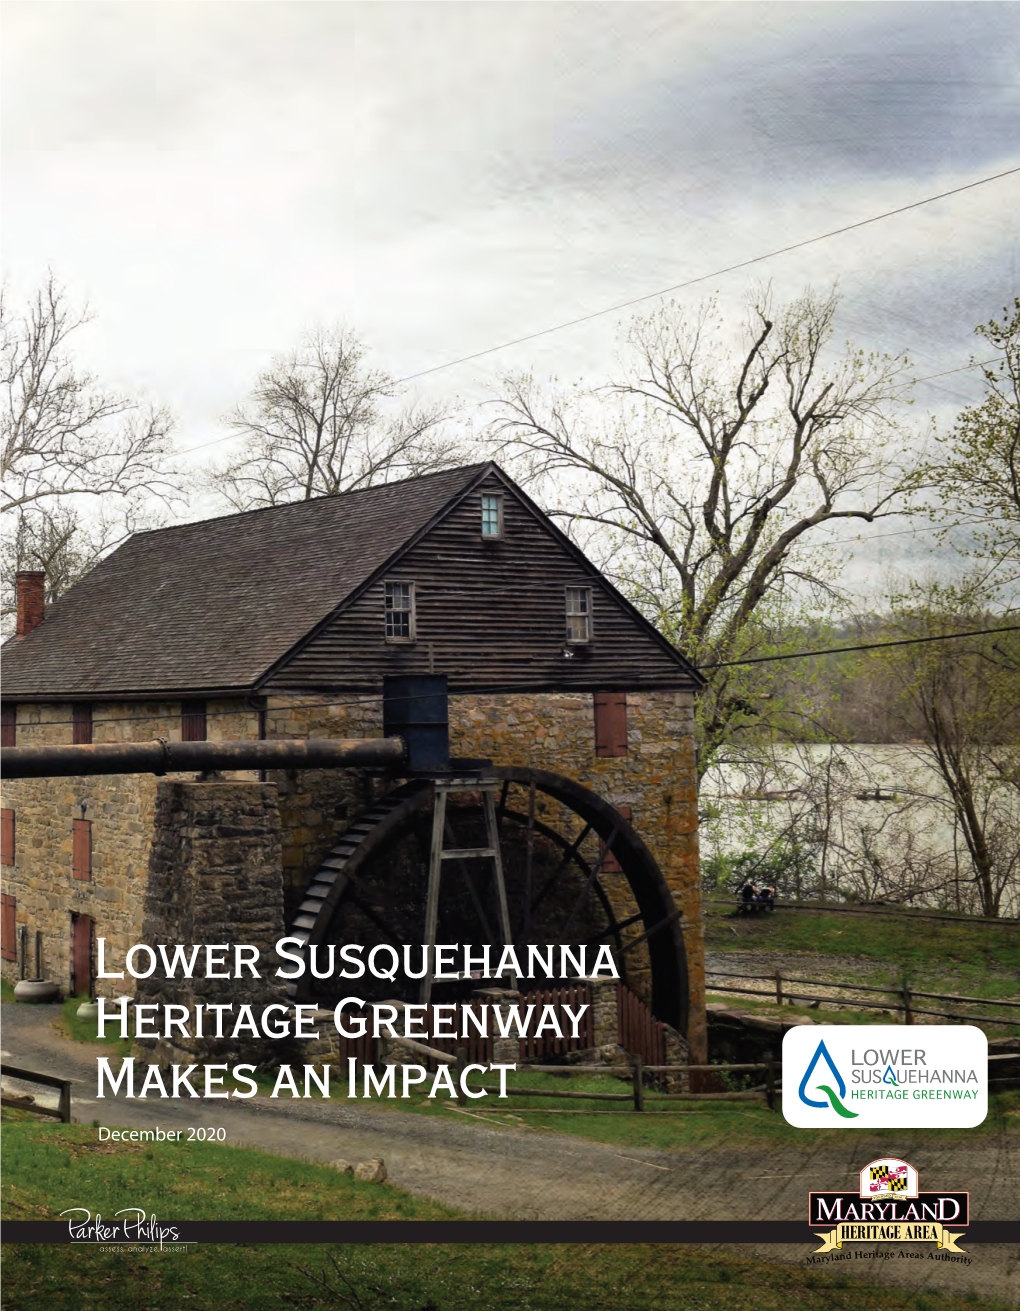 Lower Susquehanna Heritage Greenway Makes an Impact December 2020 About Lower Susquehanna Heritage Greenway